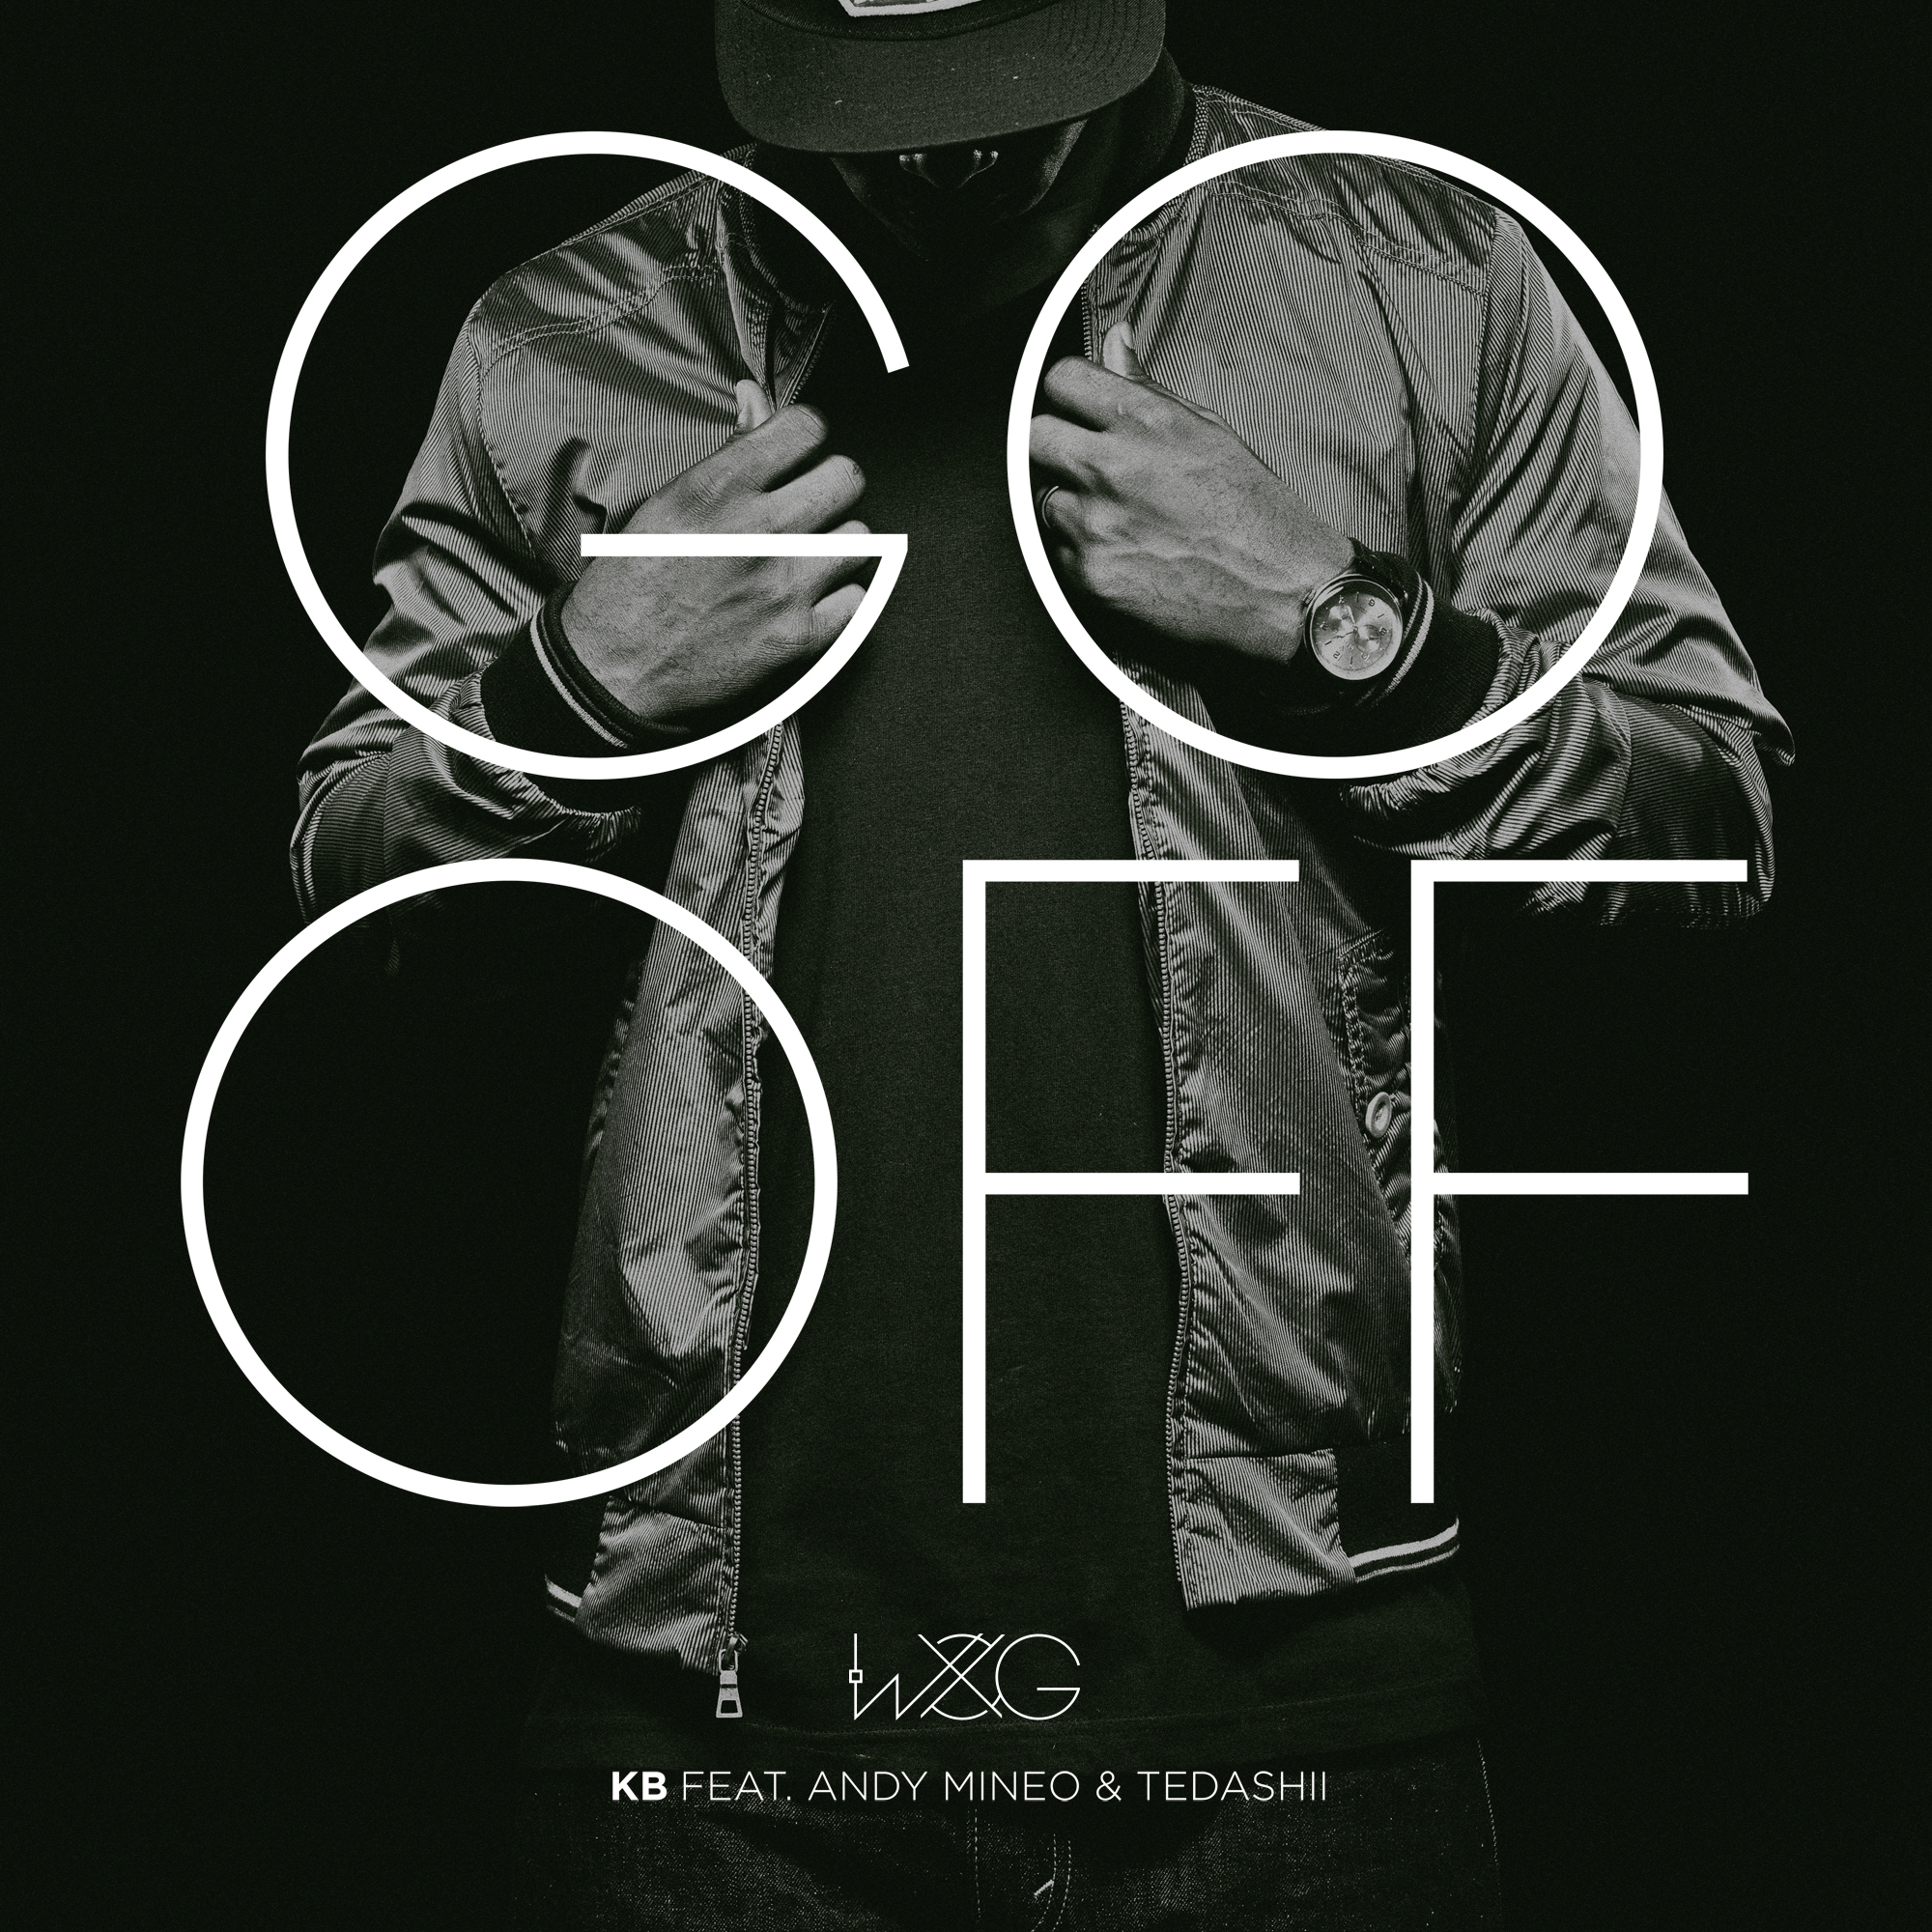 KB – New Single “Go Off” Feat. Tedashii & Andy Mineo now on iTunes!